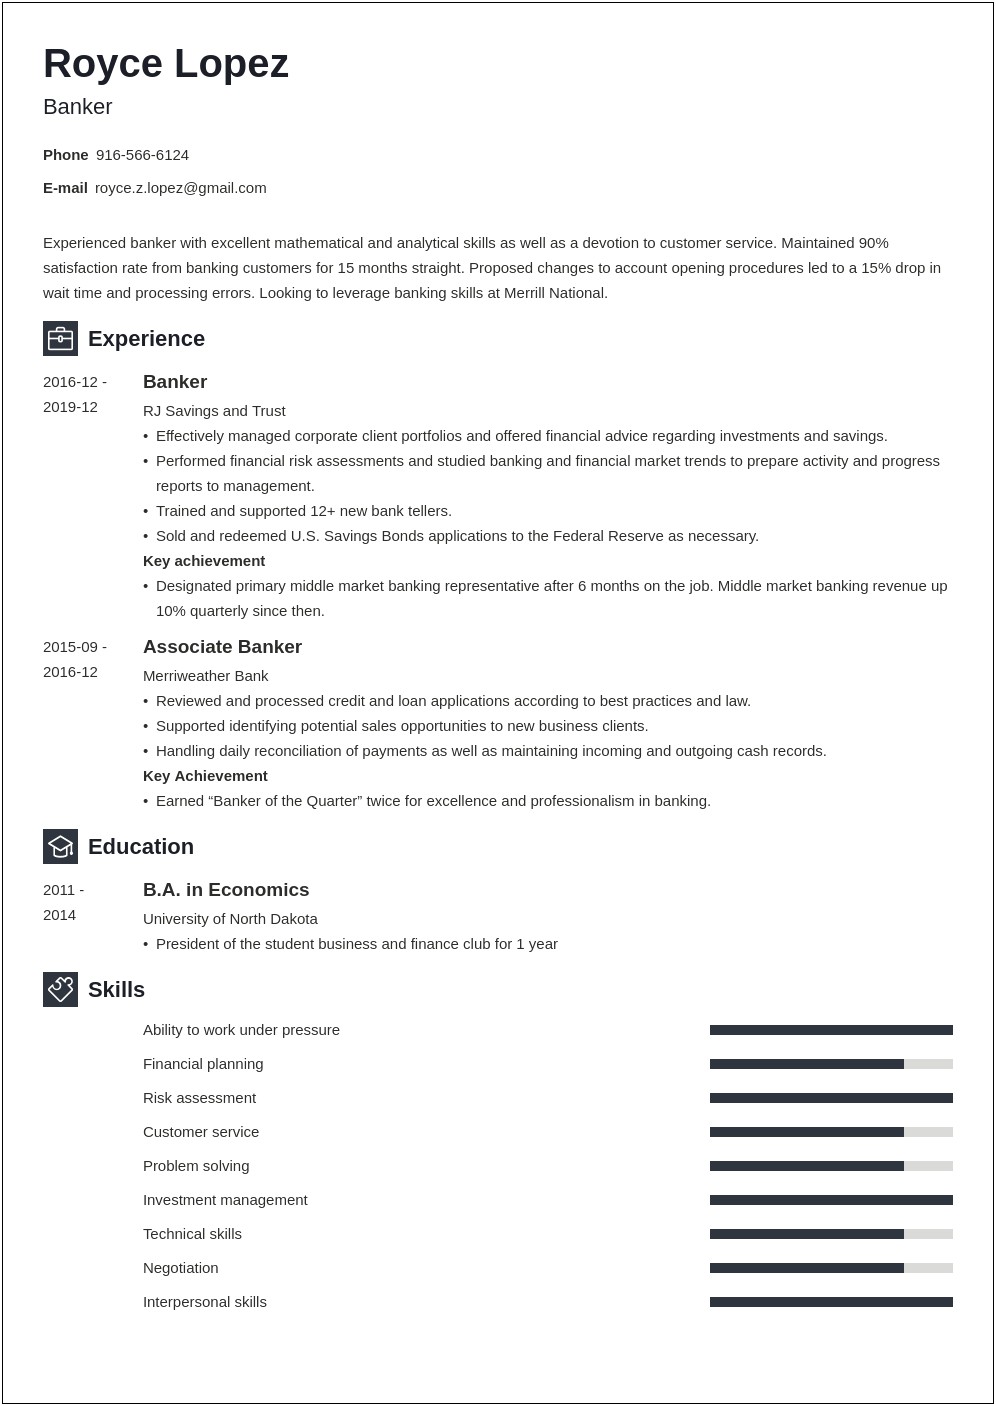 Resume Objectives Trackid Sp 006